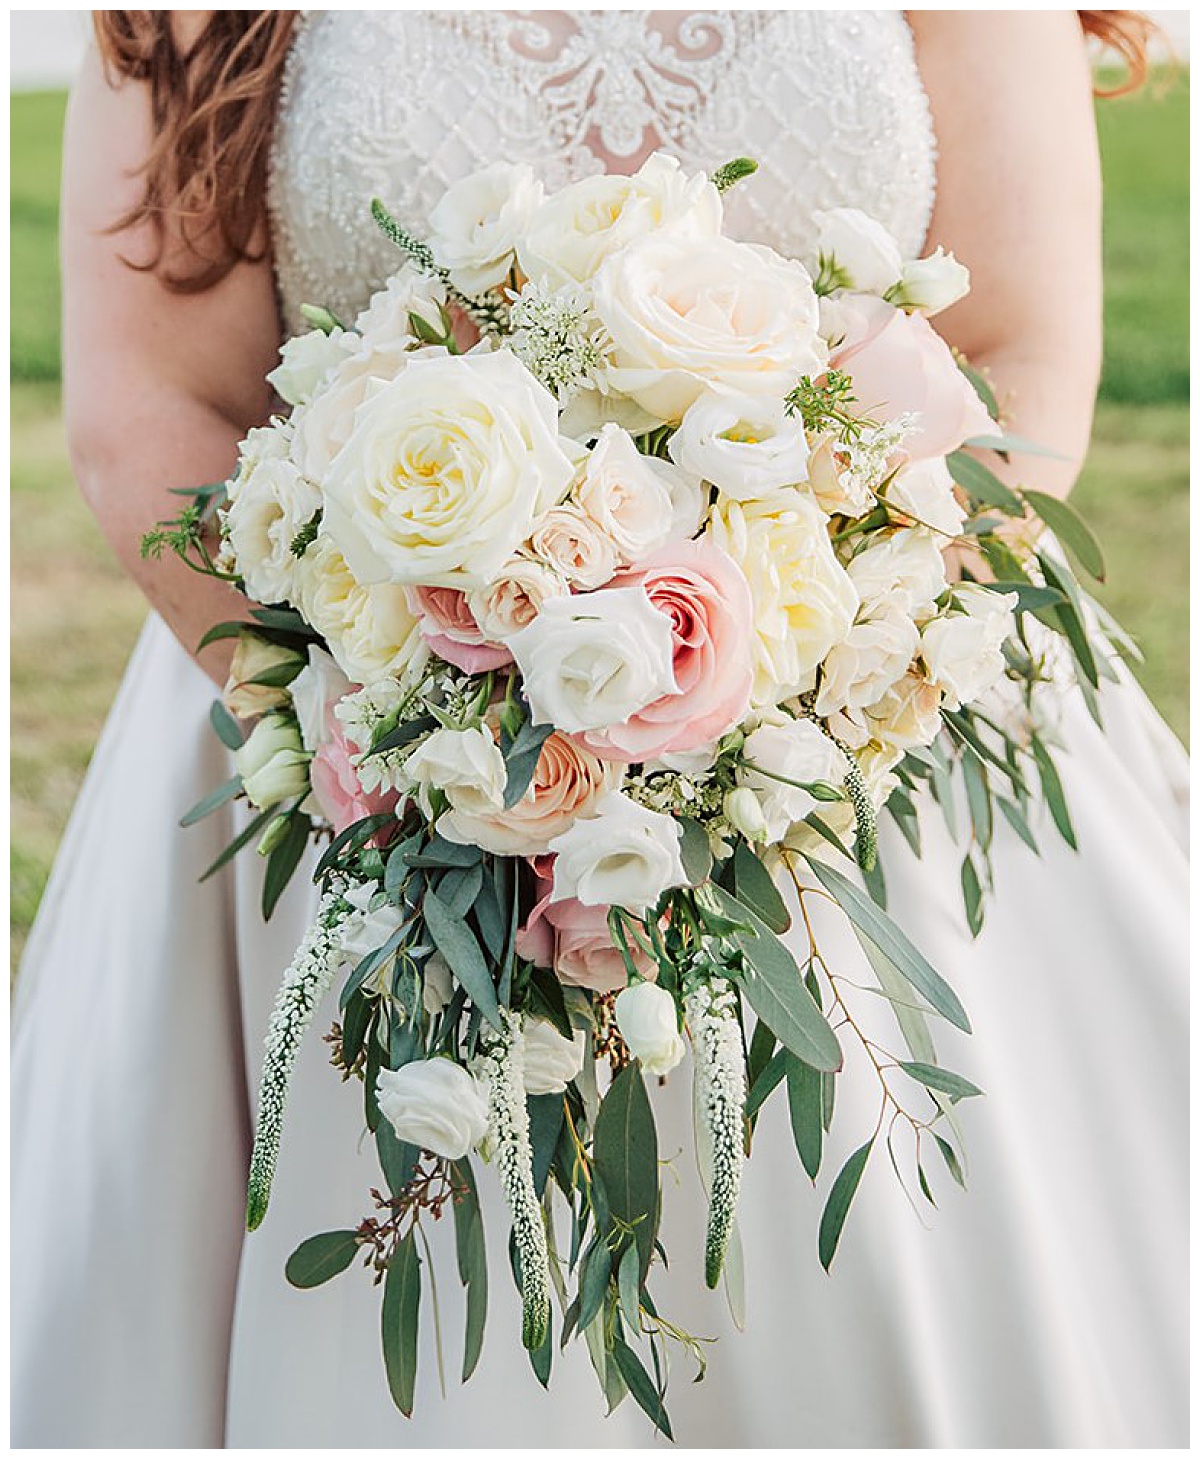 Cascade Bridal bouquet at Houston Winery wedding venue in Bellville, Tx. Samantha O' Neal Photography 